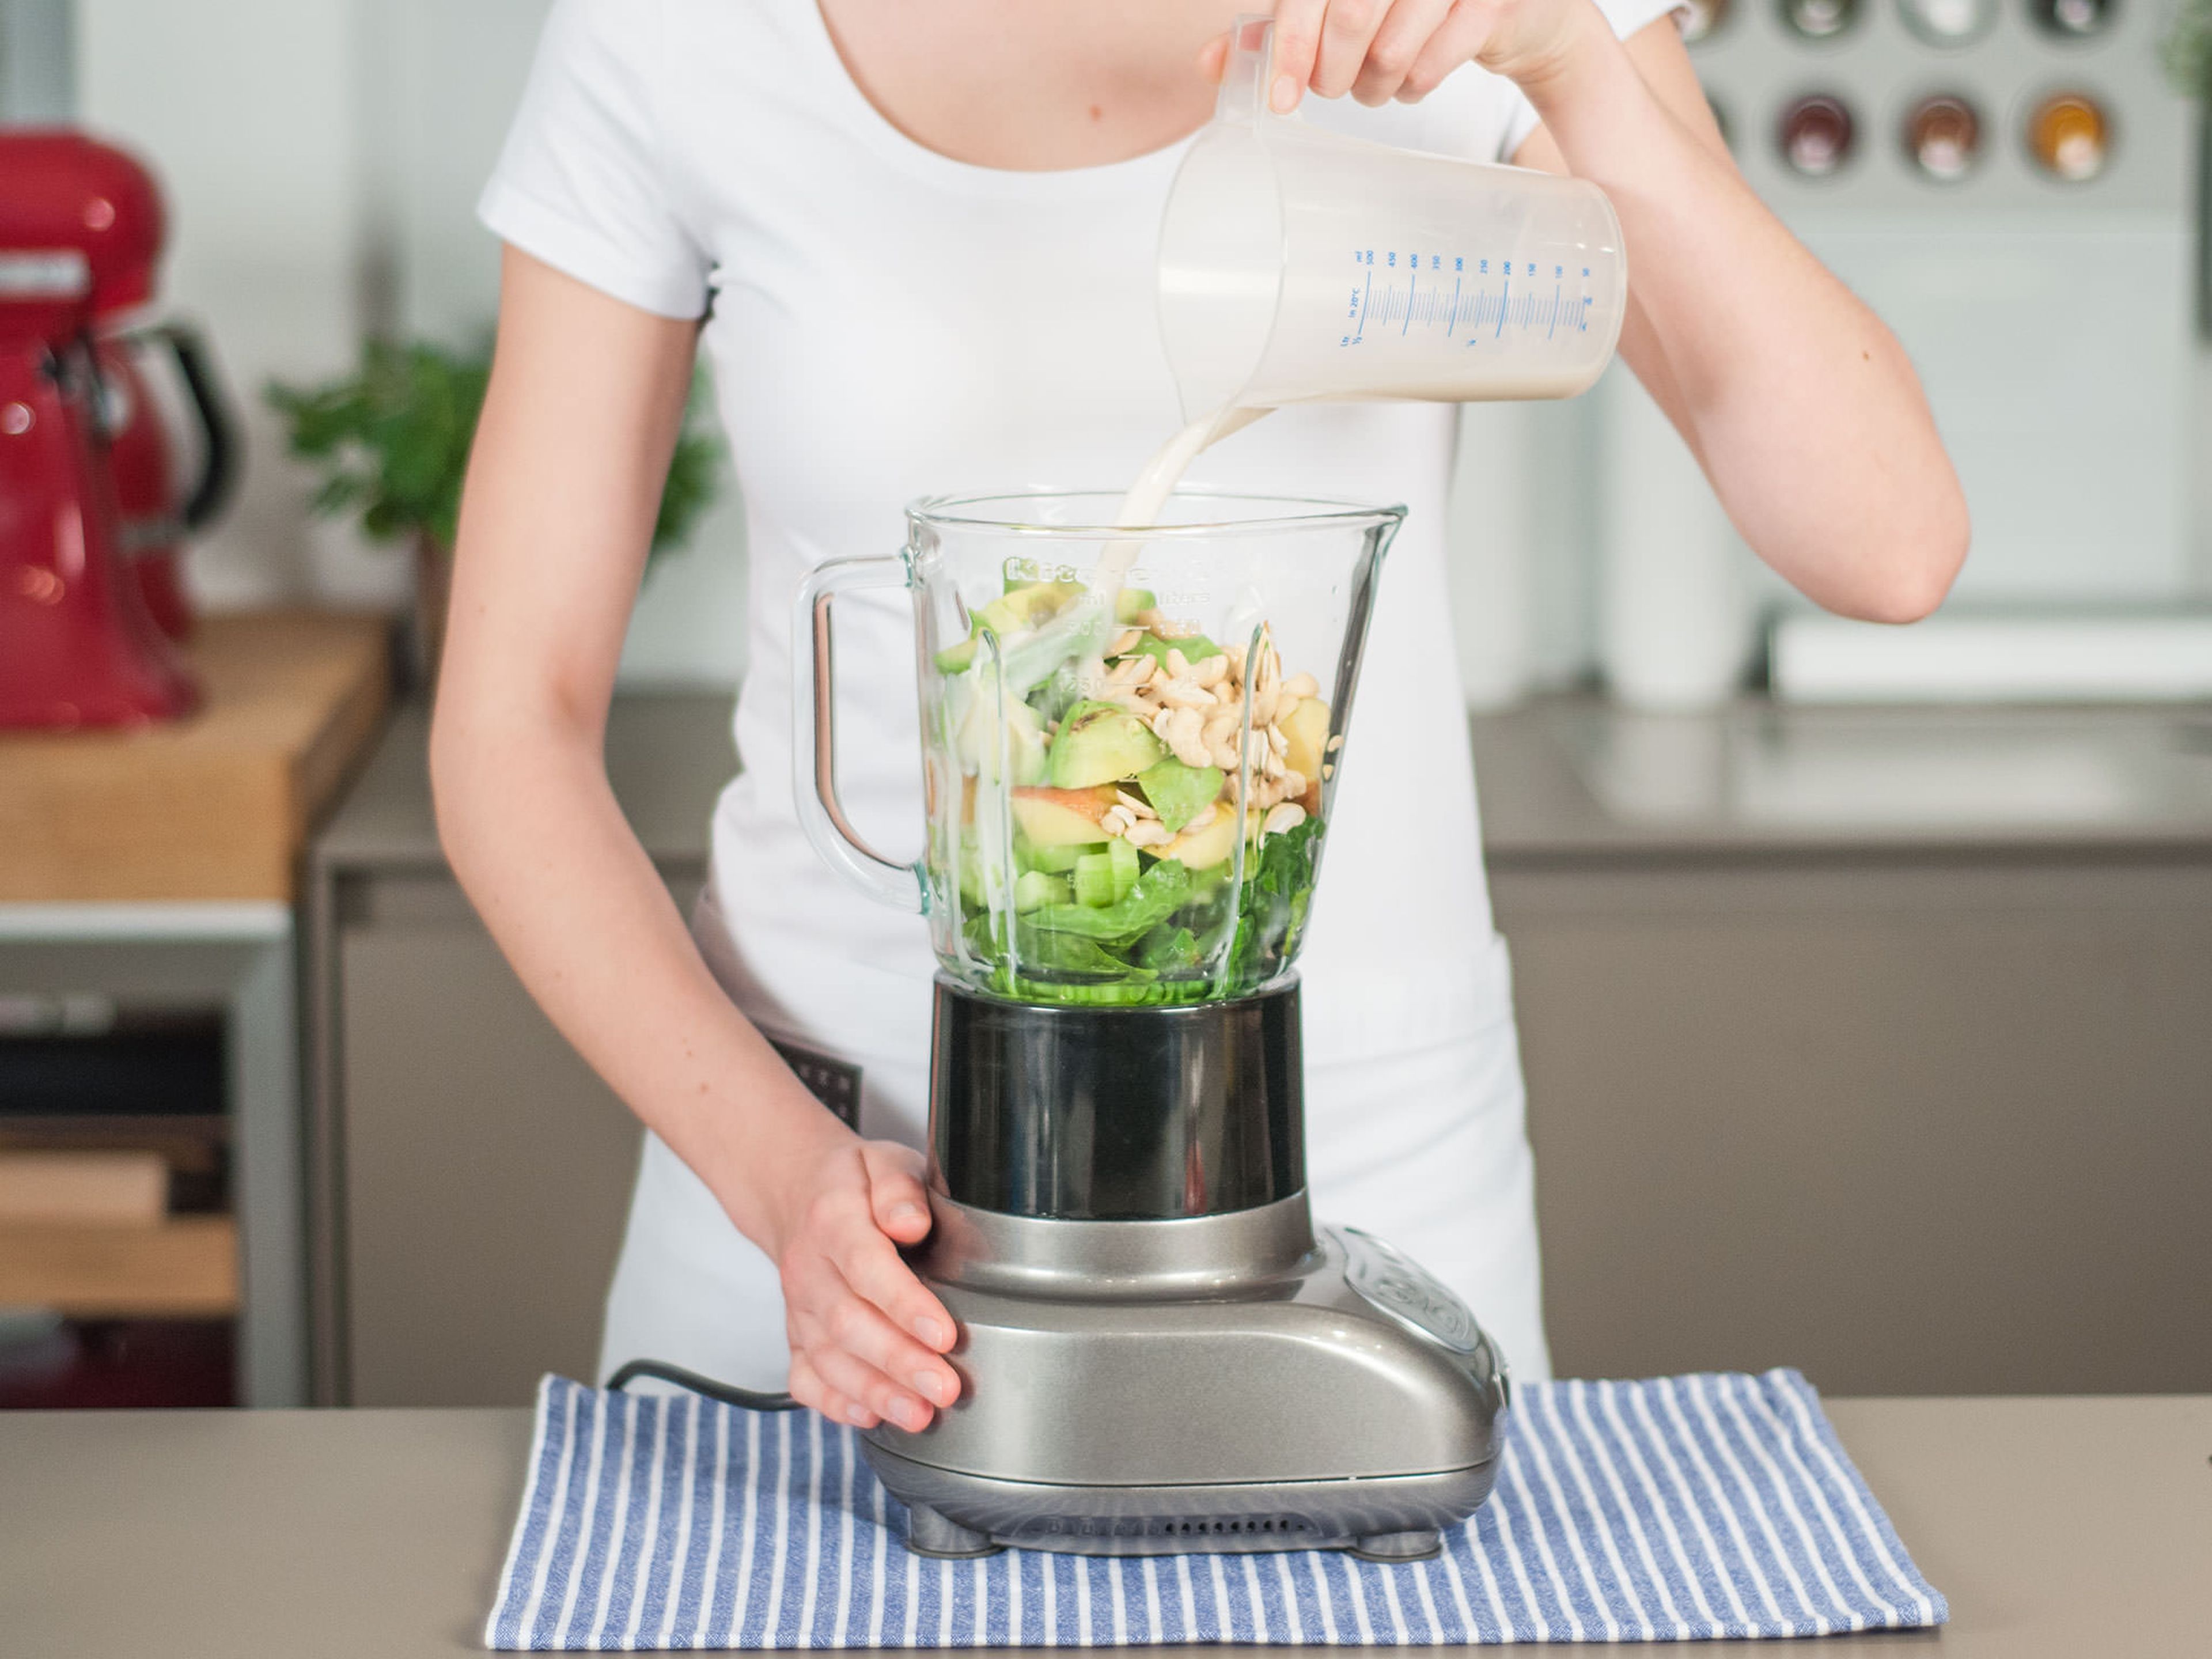 Add chopped apple, cucumber, cashews and avocado to blender. Add spinach, water, lime juice, agave syrup. Pour in almond milk. Then, blend on high until smooth, approx. 2 – 3 min. Enjoy right away!